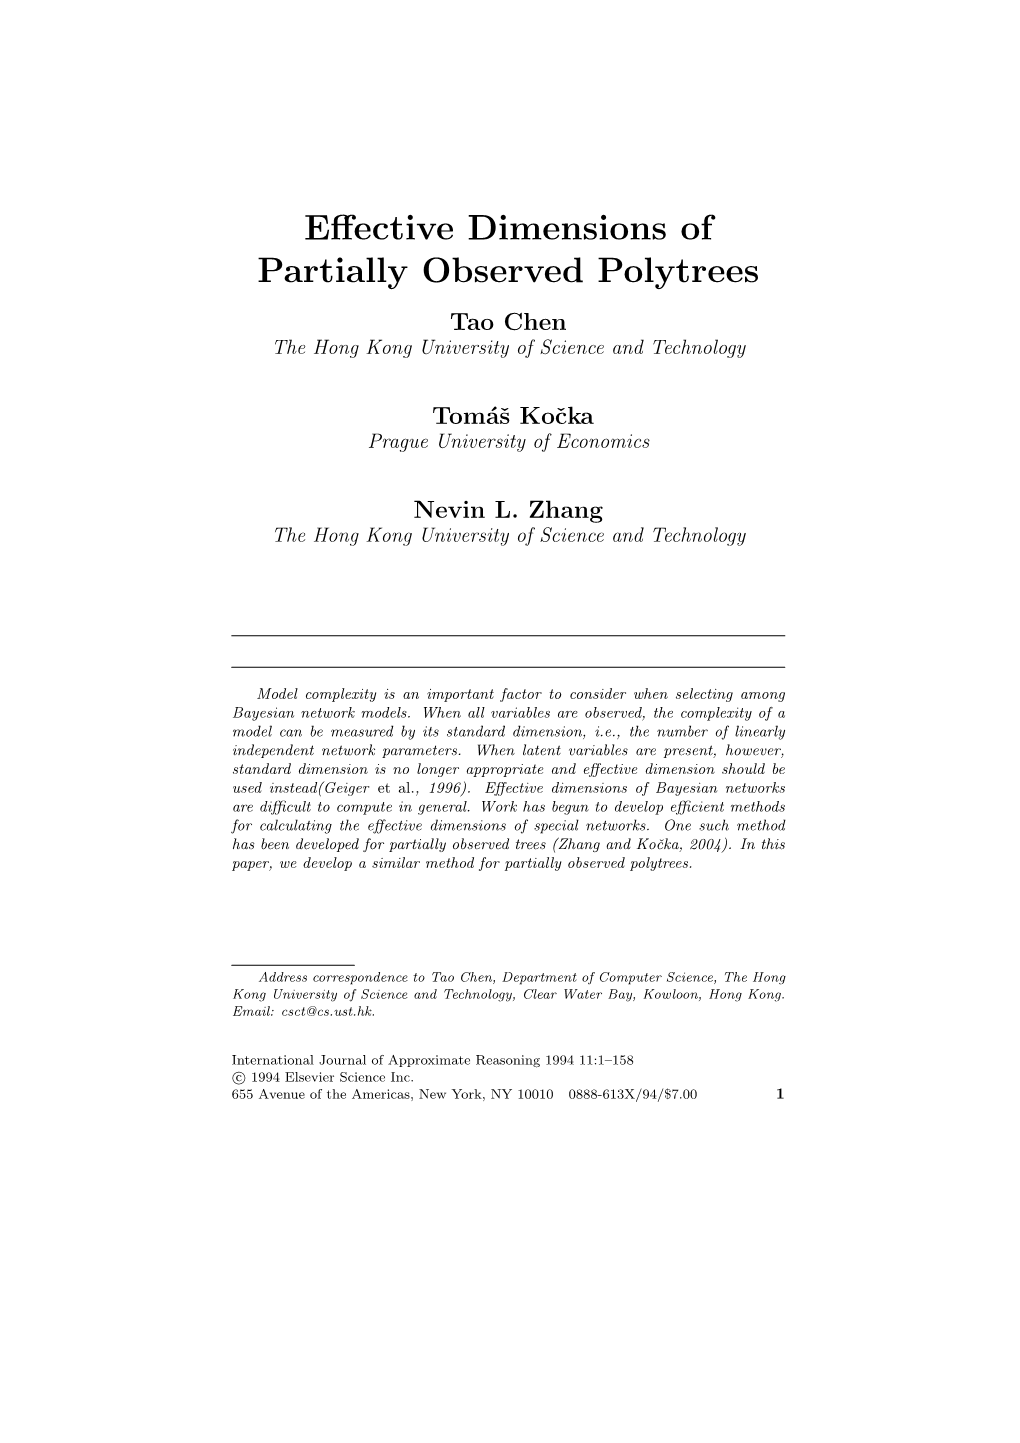 Effective Dimensions of Partially Observed Polytrees